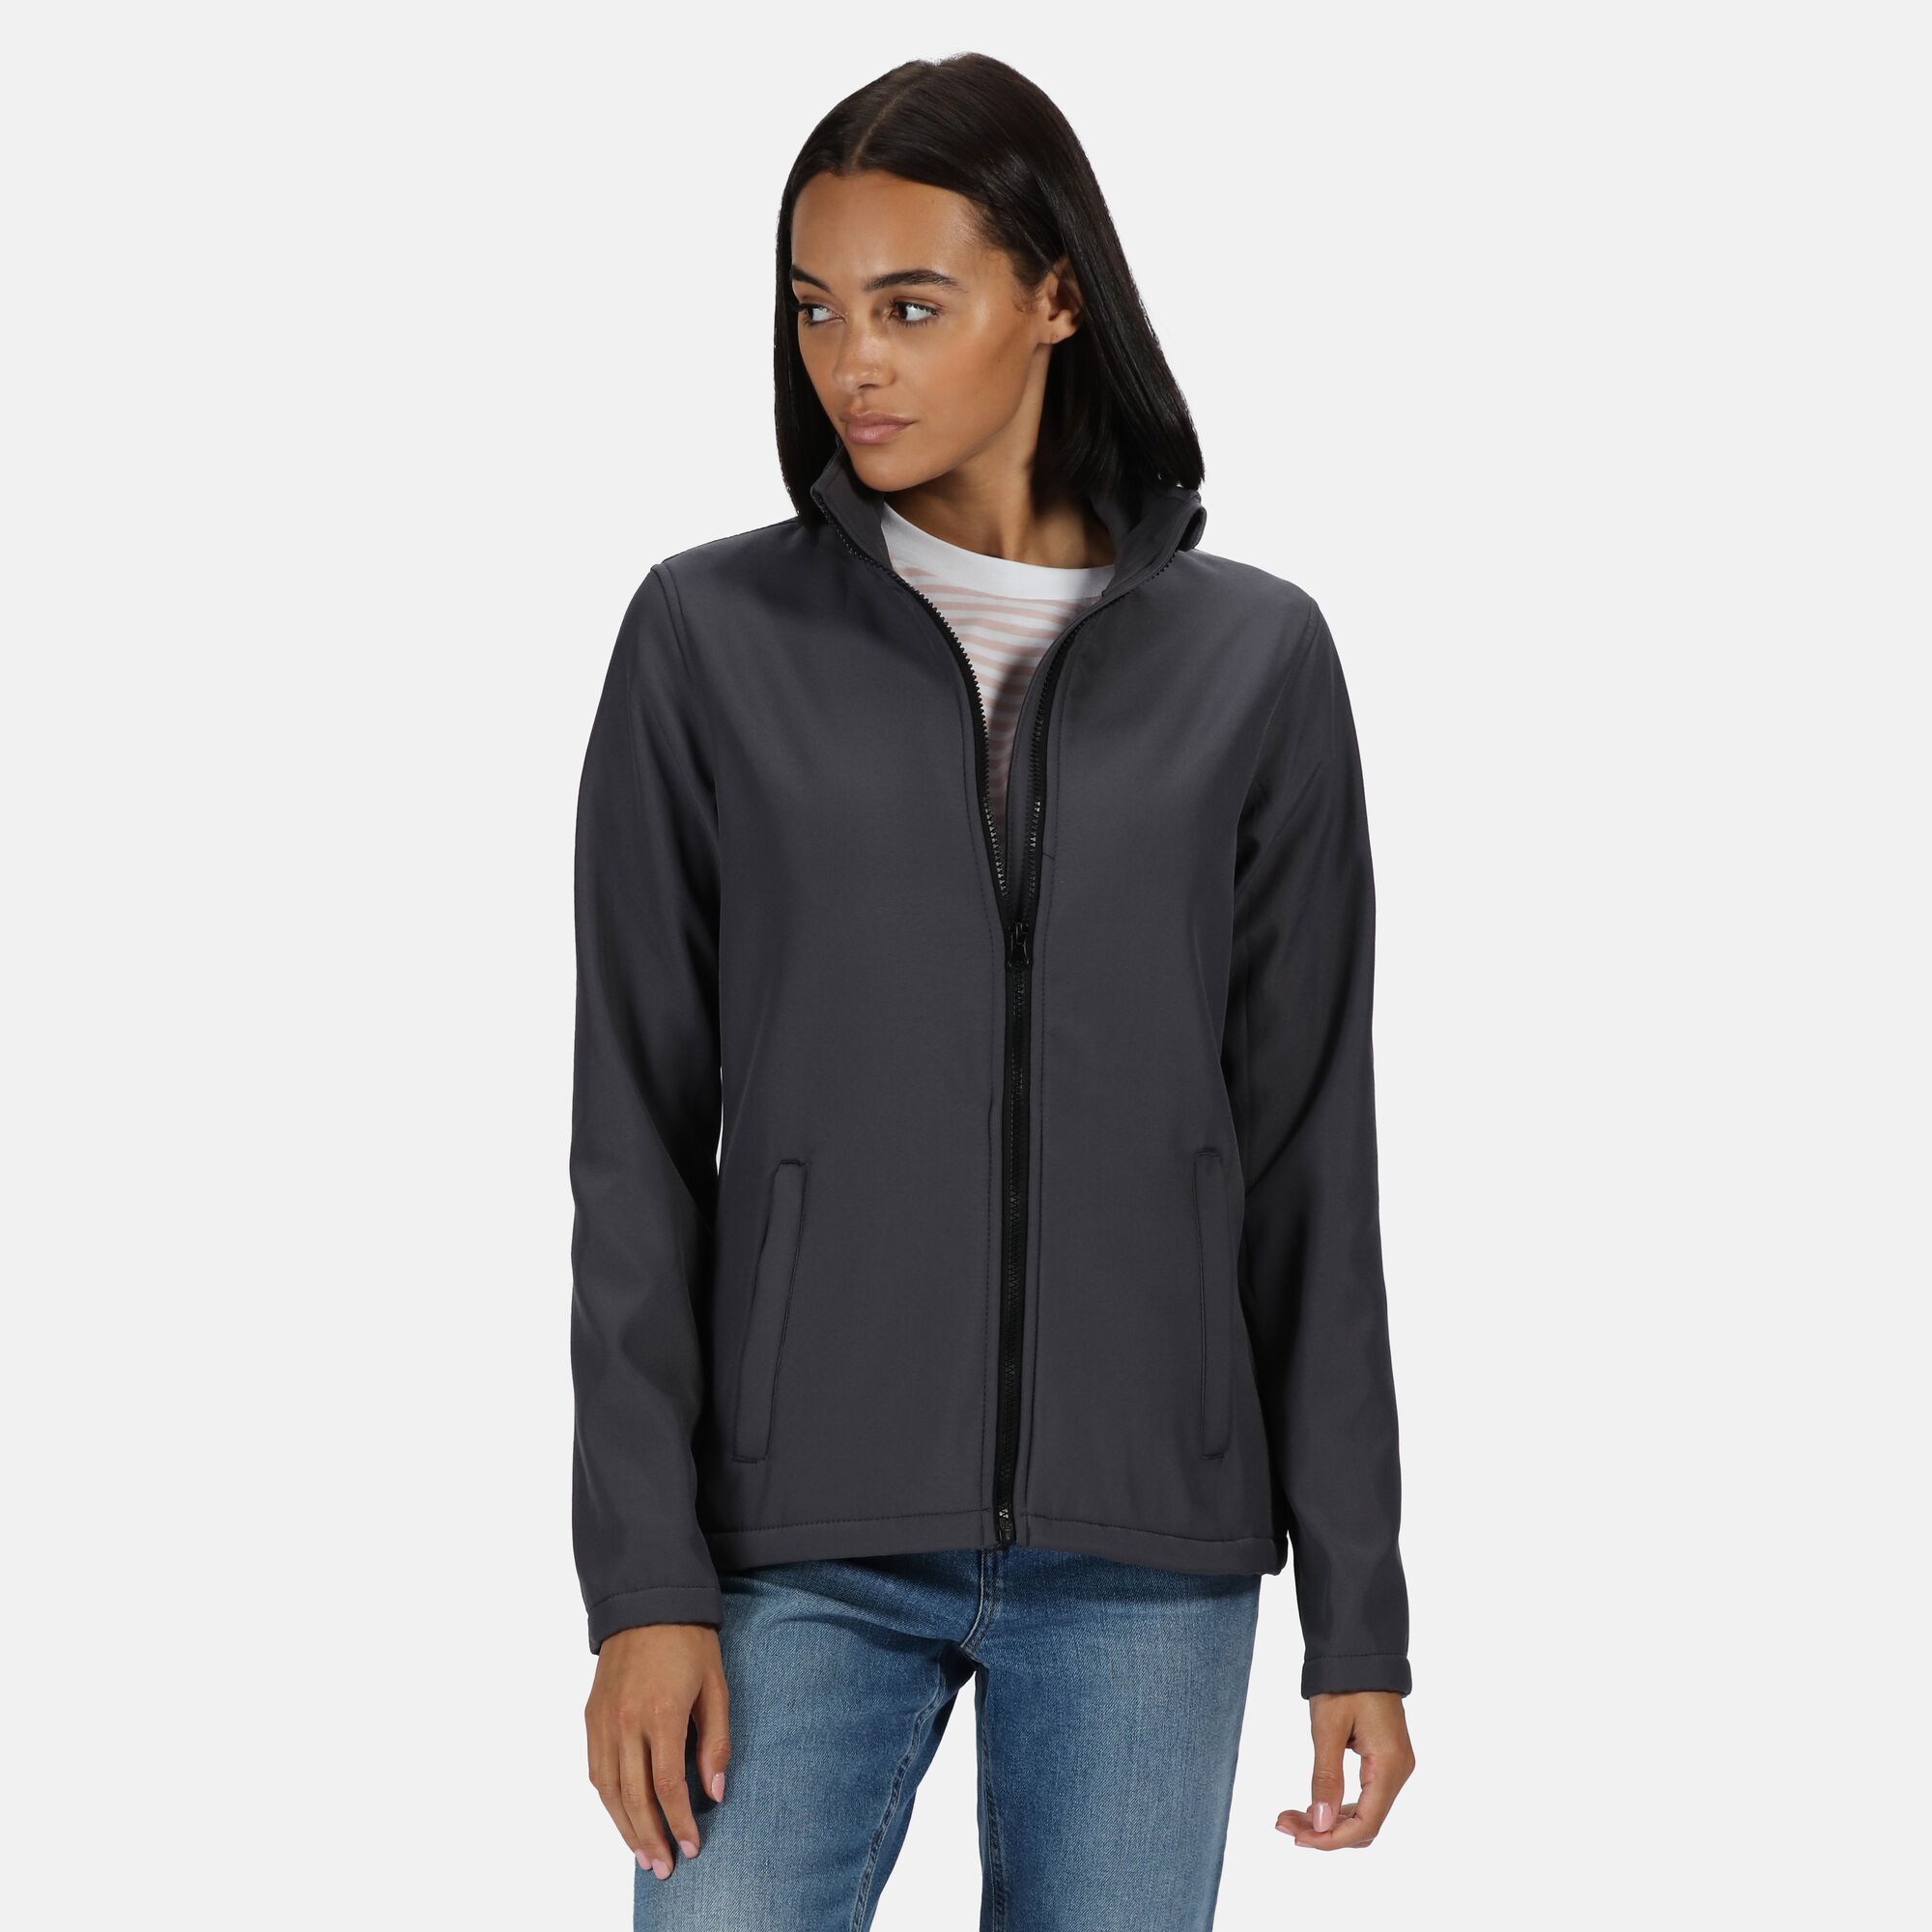 Wind resistant membrane. Showerproof. Shaped fit. Collar high contrast full length zip with inner zip guard. Two front pockets. Open cuffs. Drawcord hem. Cut out label. Ideal for screen, transfer and vinyl printing.